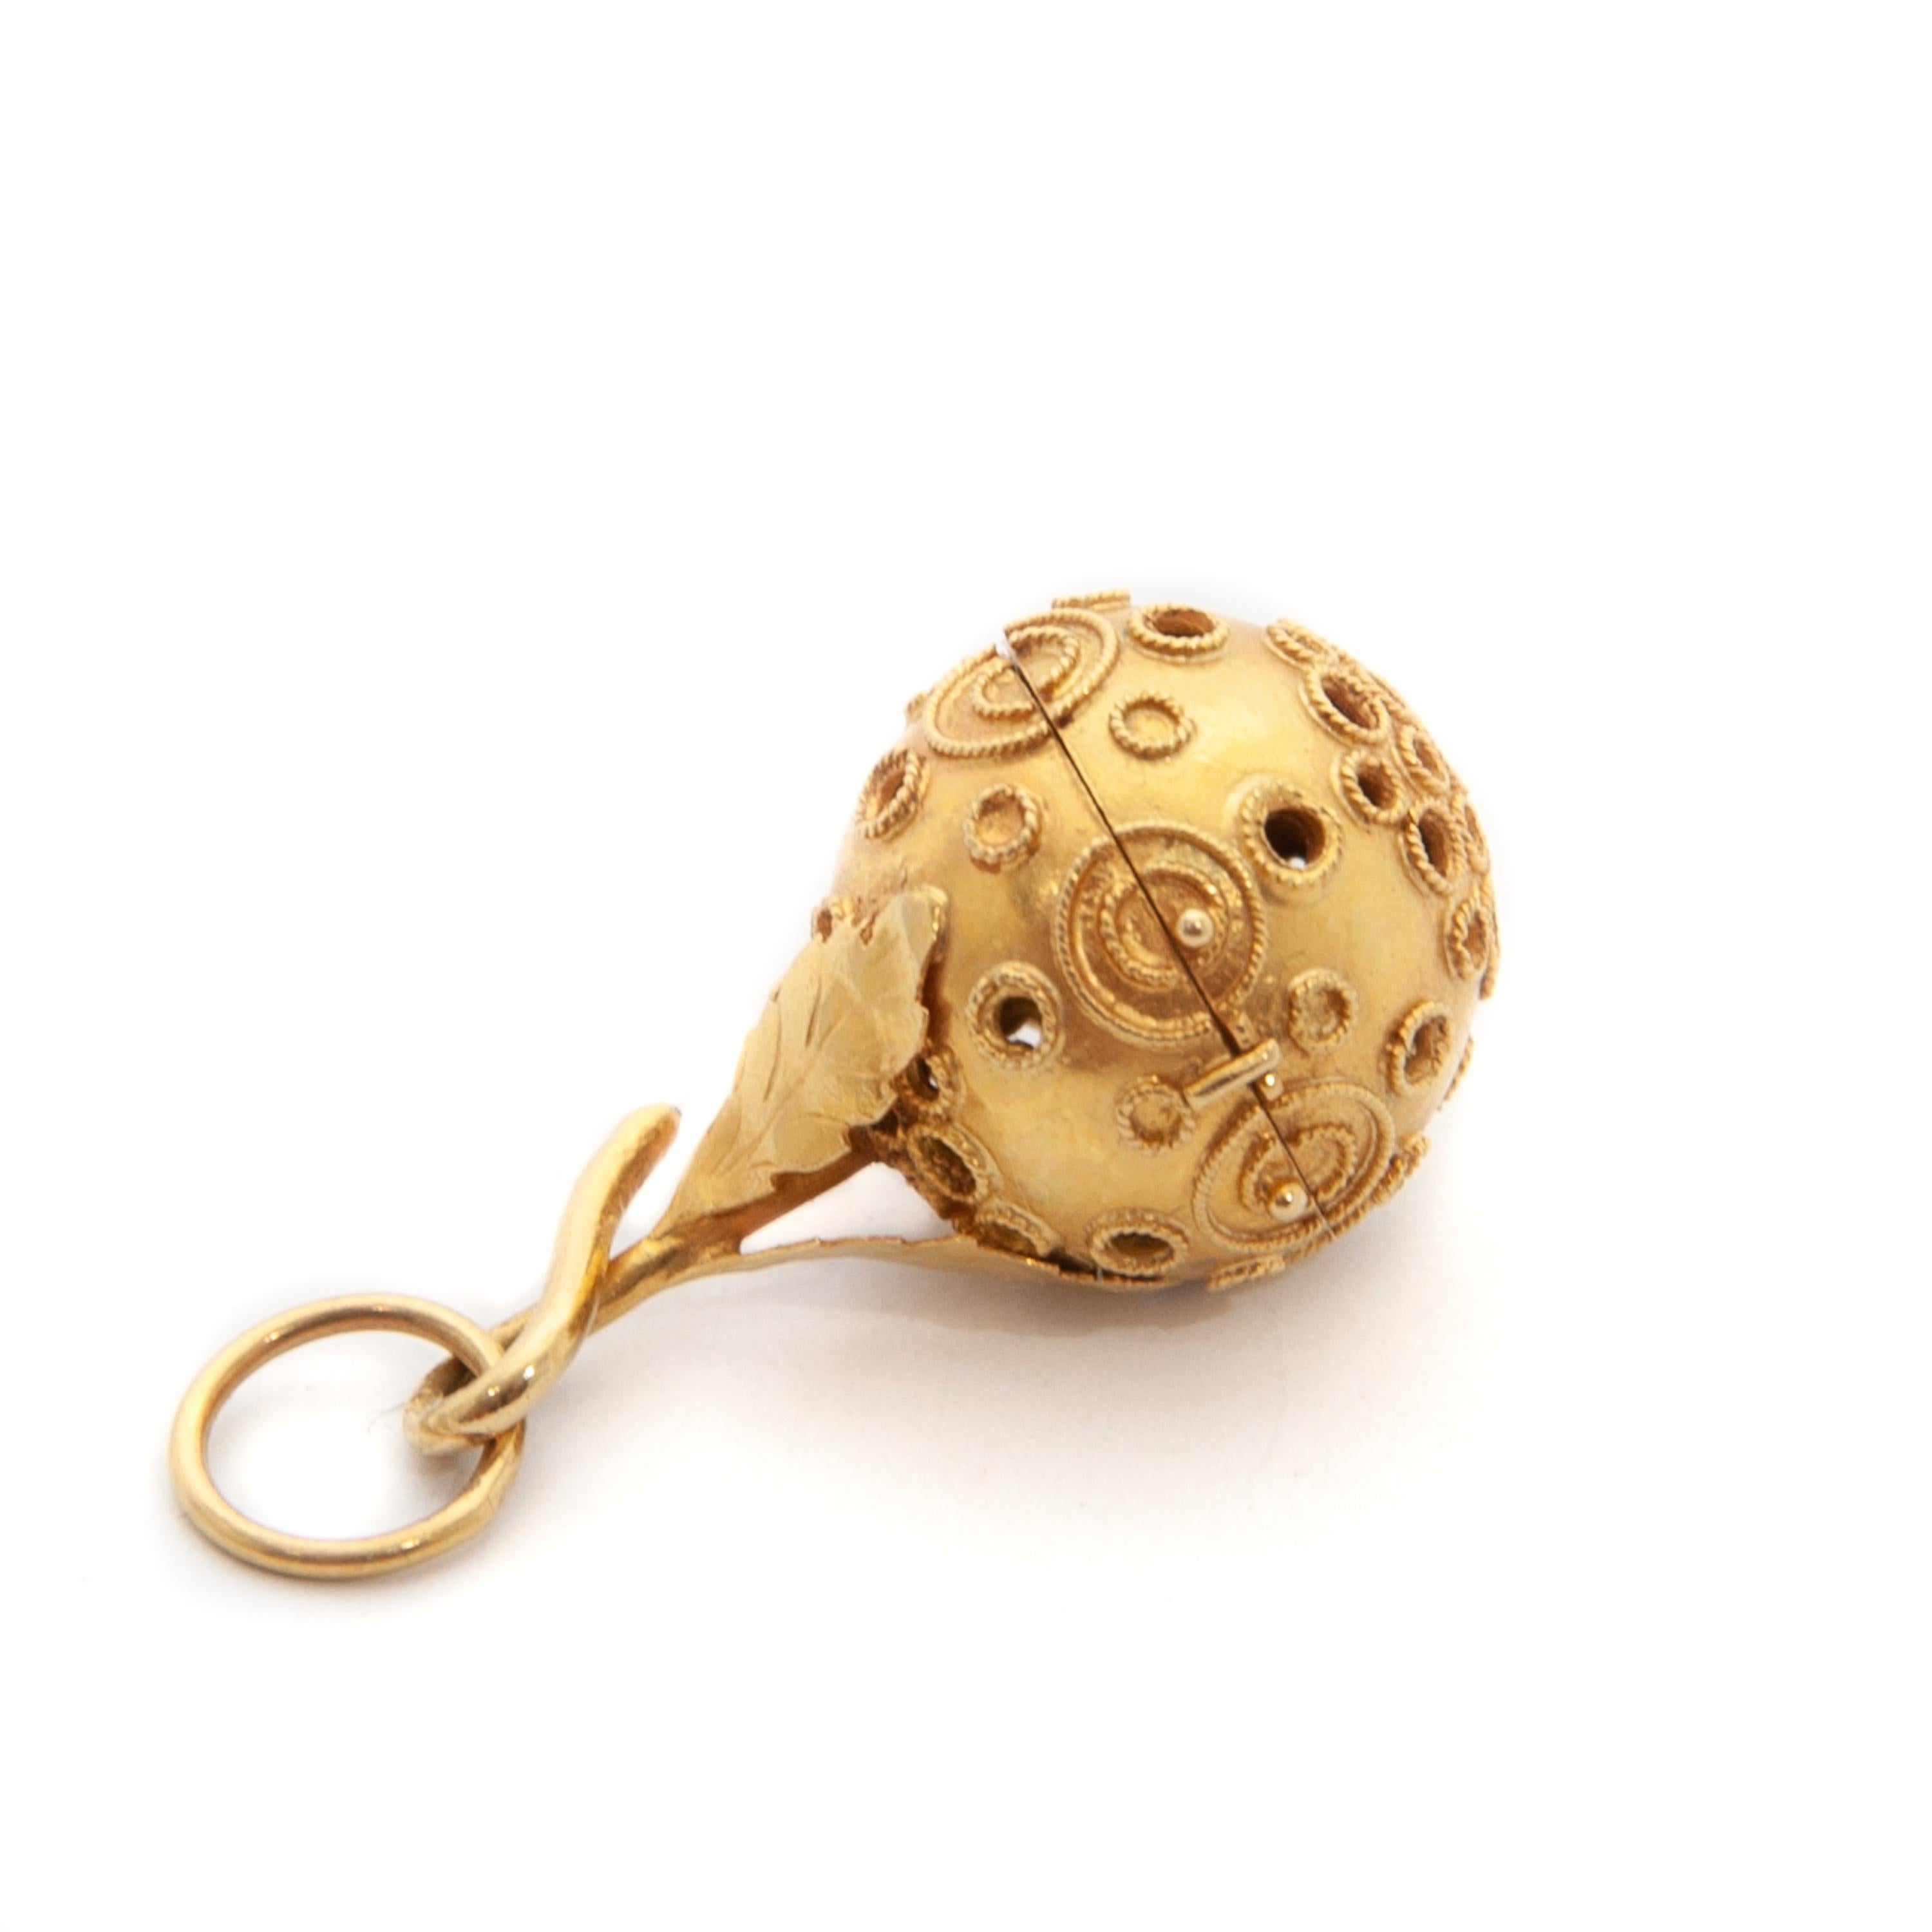 Three-dimensional 19th century yellow gold filigree pendant in the shape of an apple. Intricate and patterned, this lovely little apple is made in 20 karat gold. It is apple-shaped, open worked and has a beautifully design with its filigree